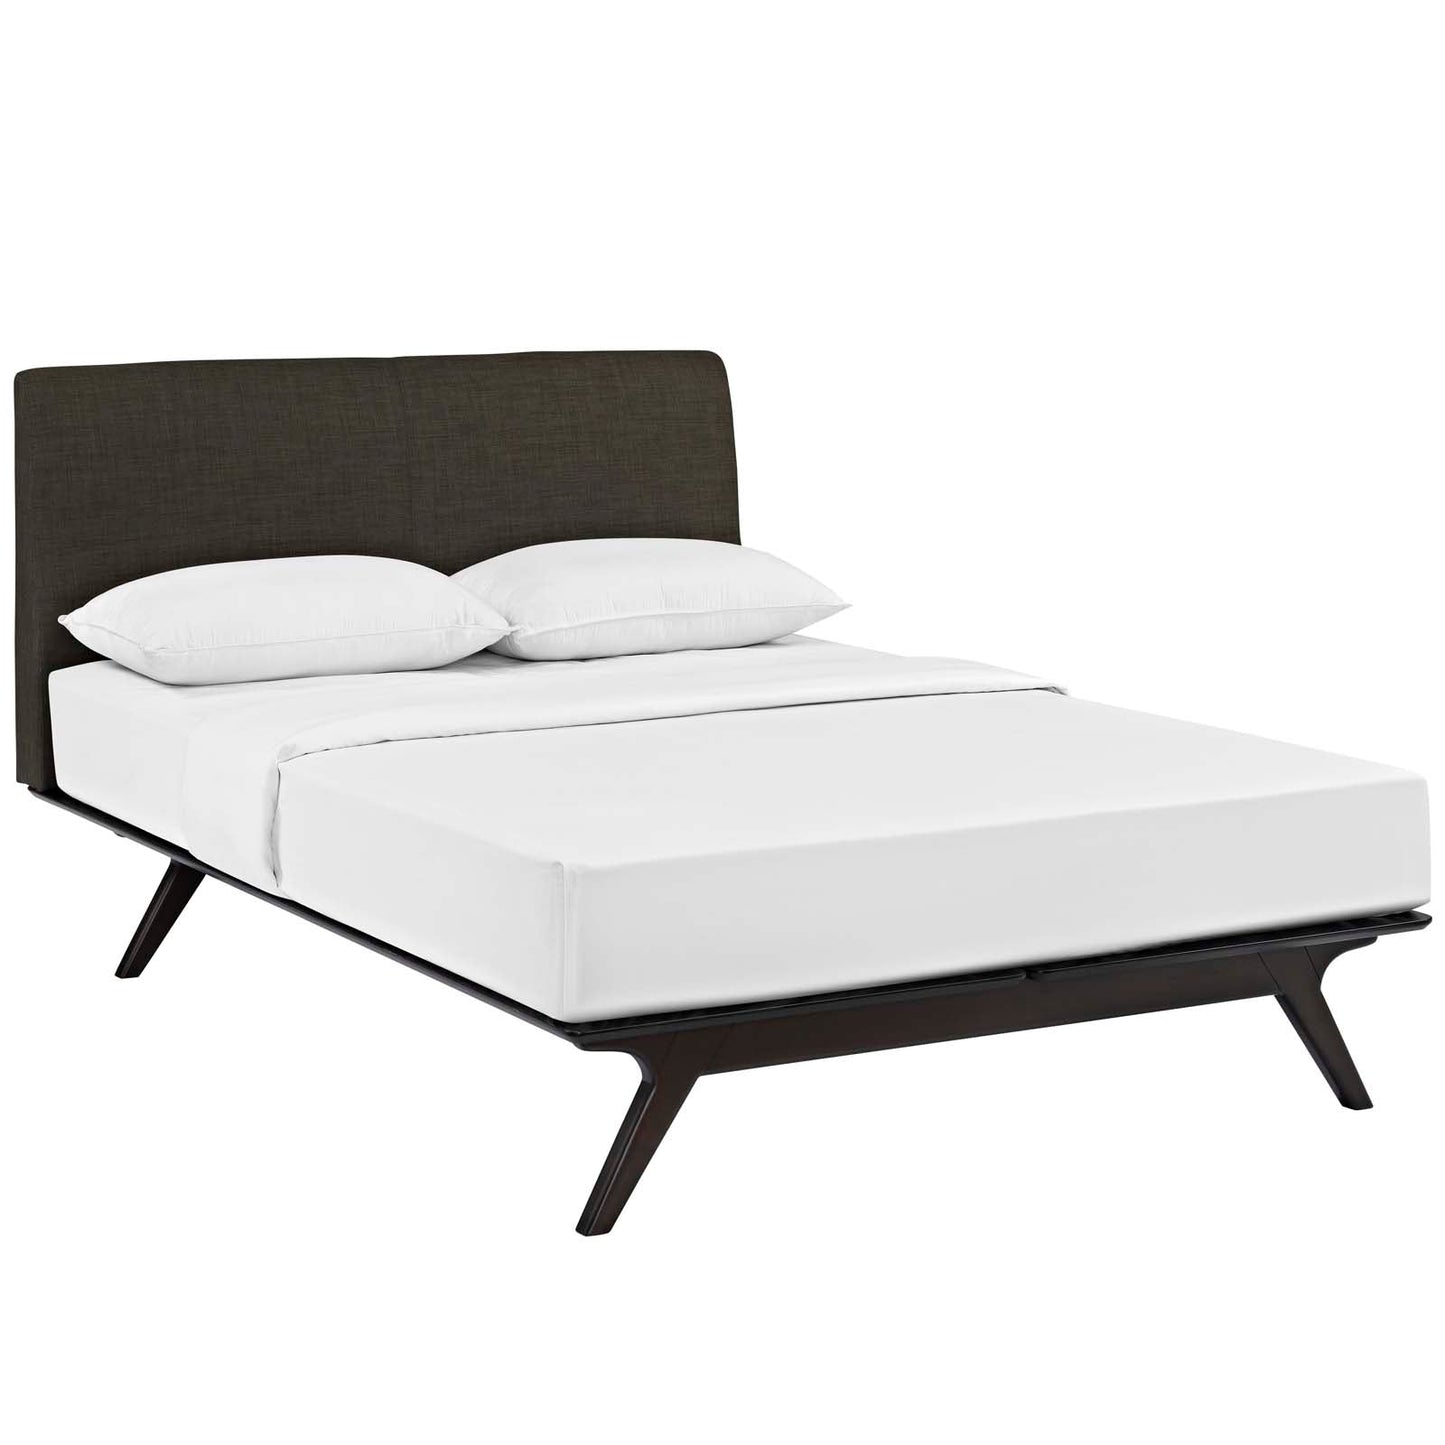 Modway Beds & Bed Frames Brown Queen Tracy Bed MOD-5238-CAP-BRN